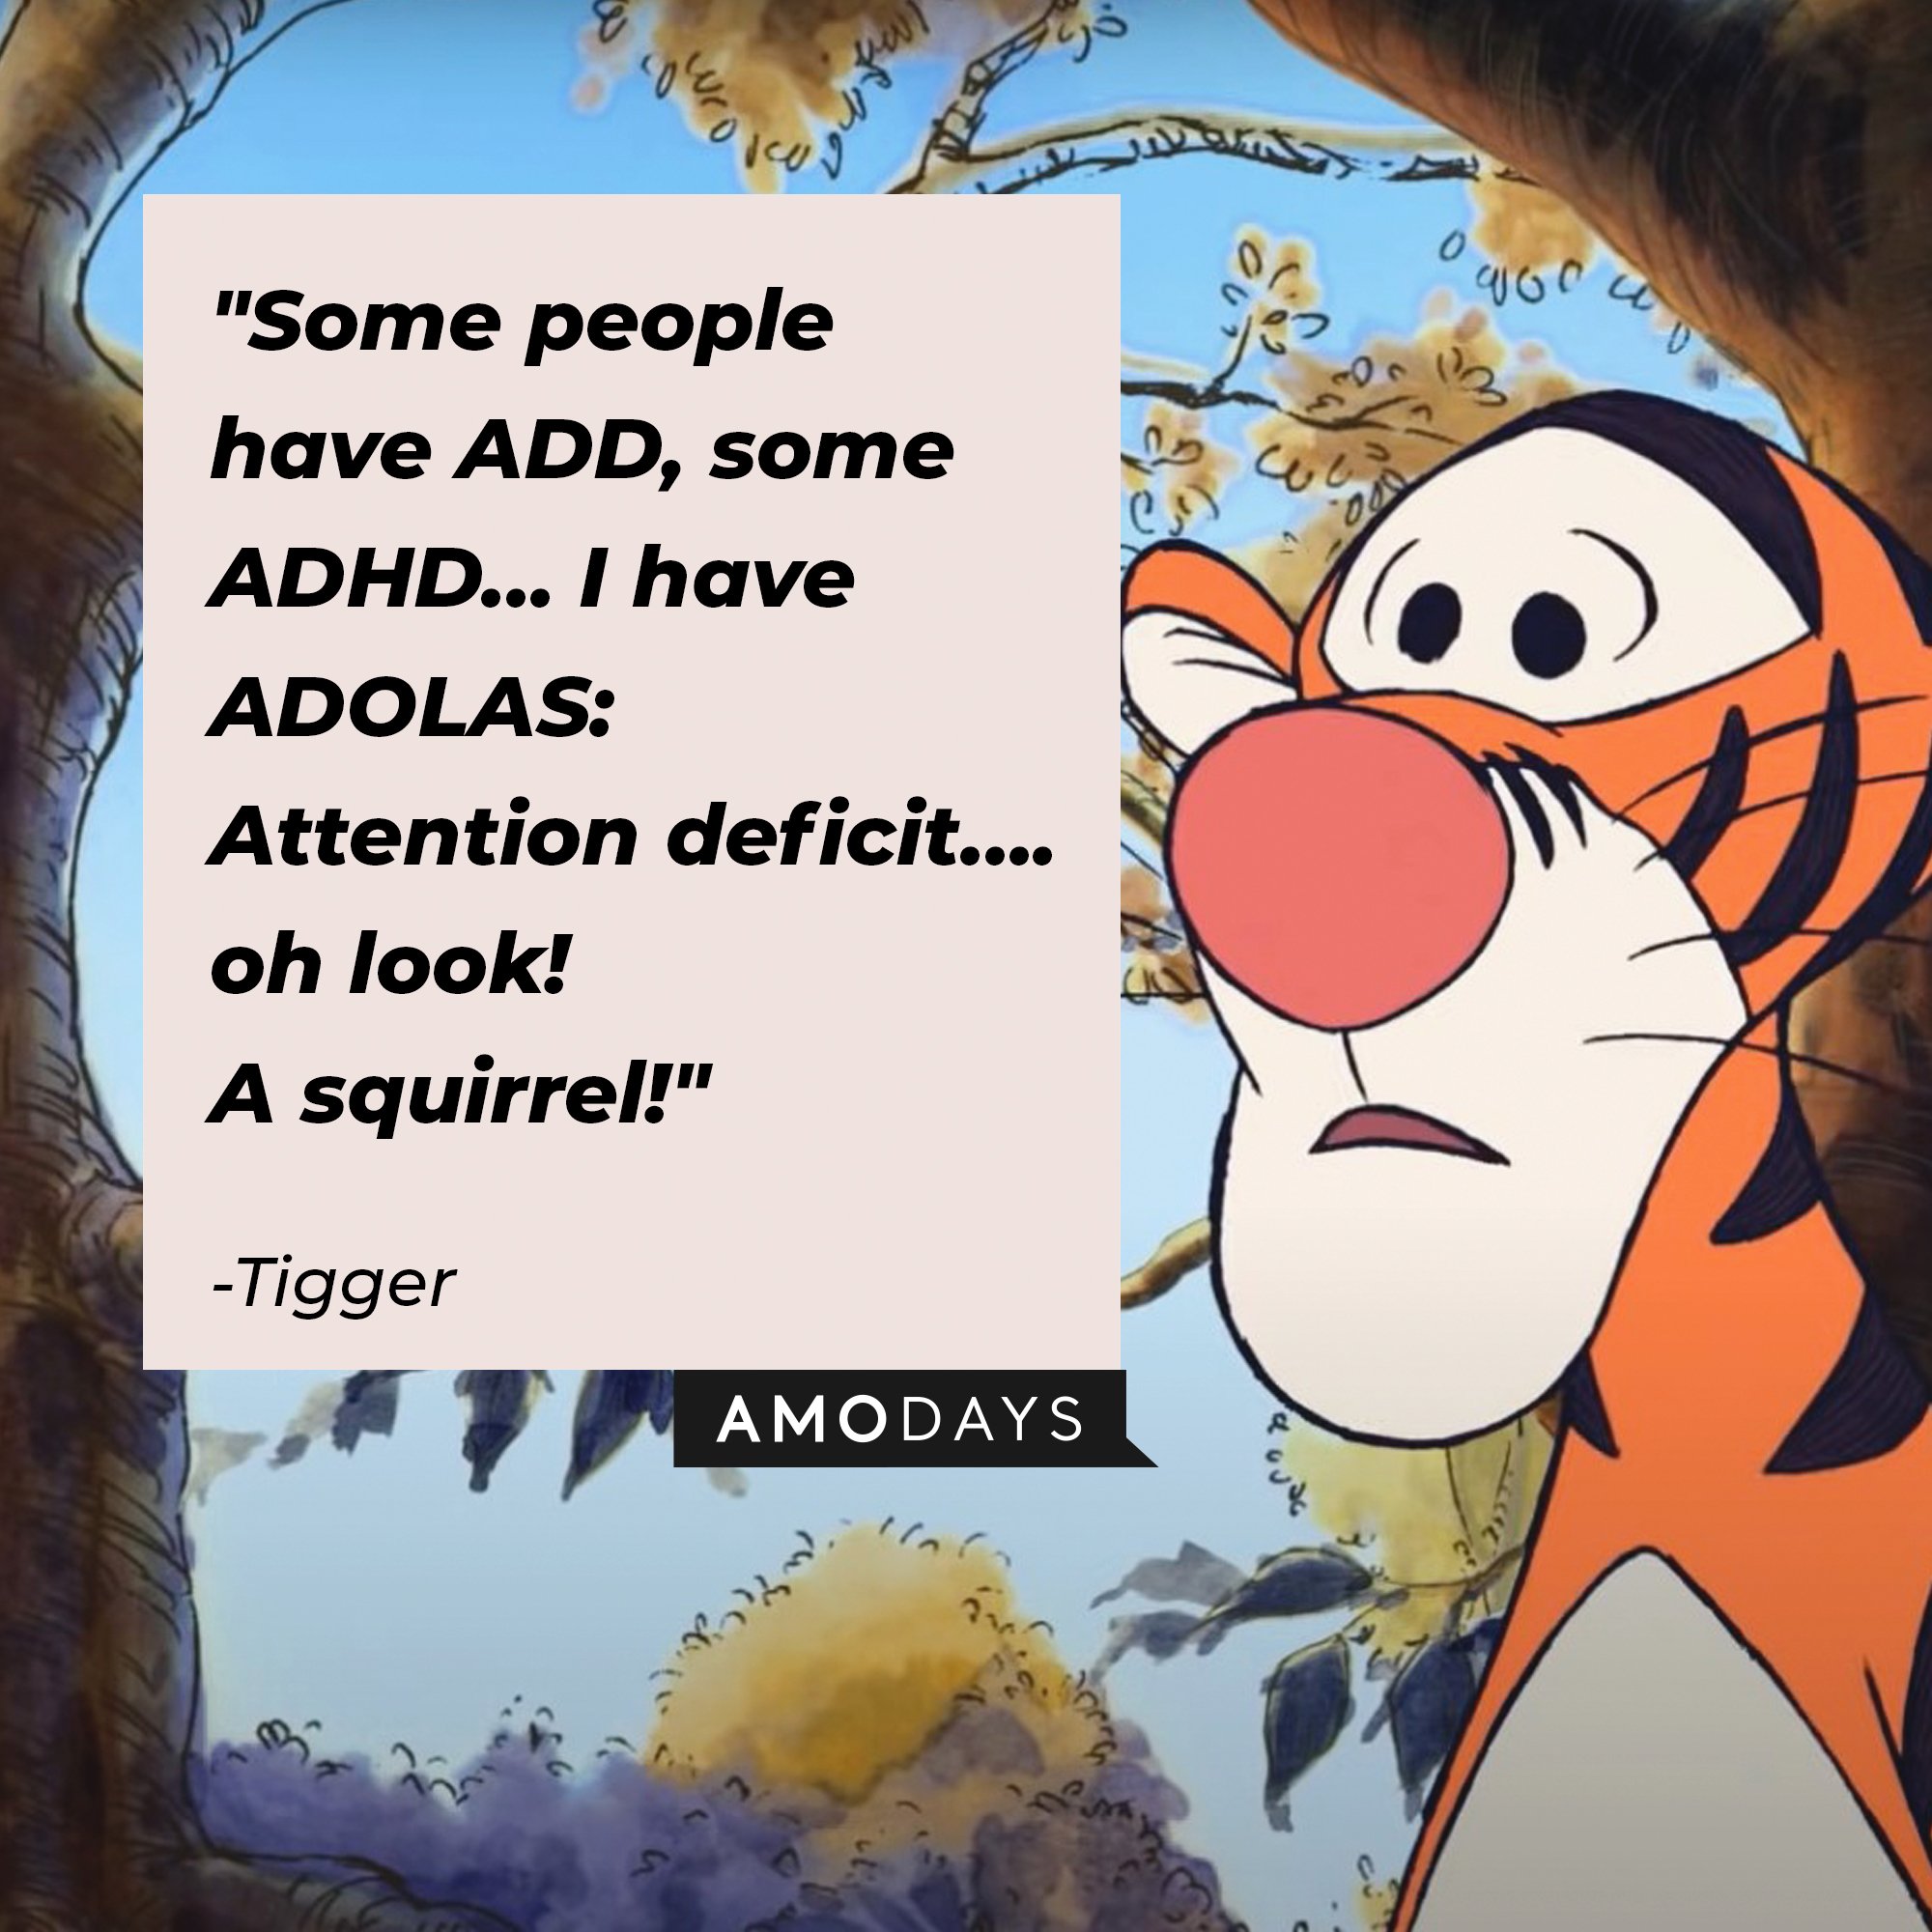 Tigger's quote: "Some people have ADD, some ADHD… I have ADOLAS: Attention deficit…. oh look! A squirrel!" | Image: AmoDays